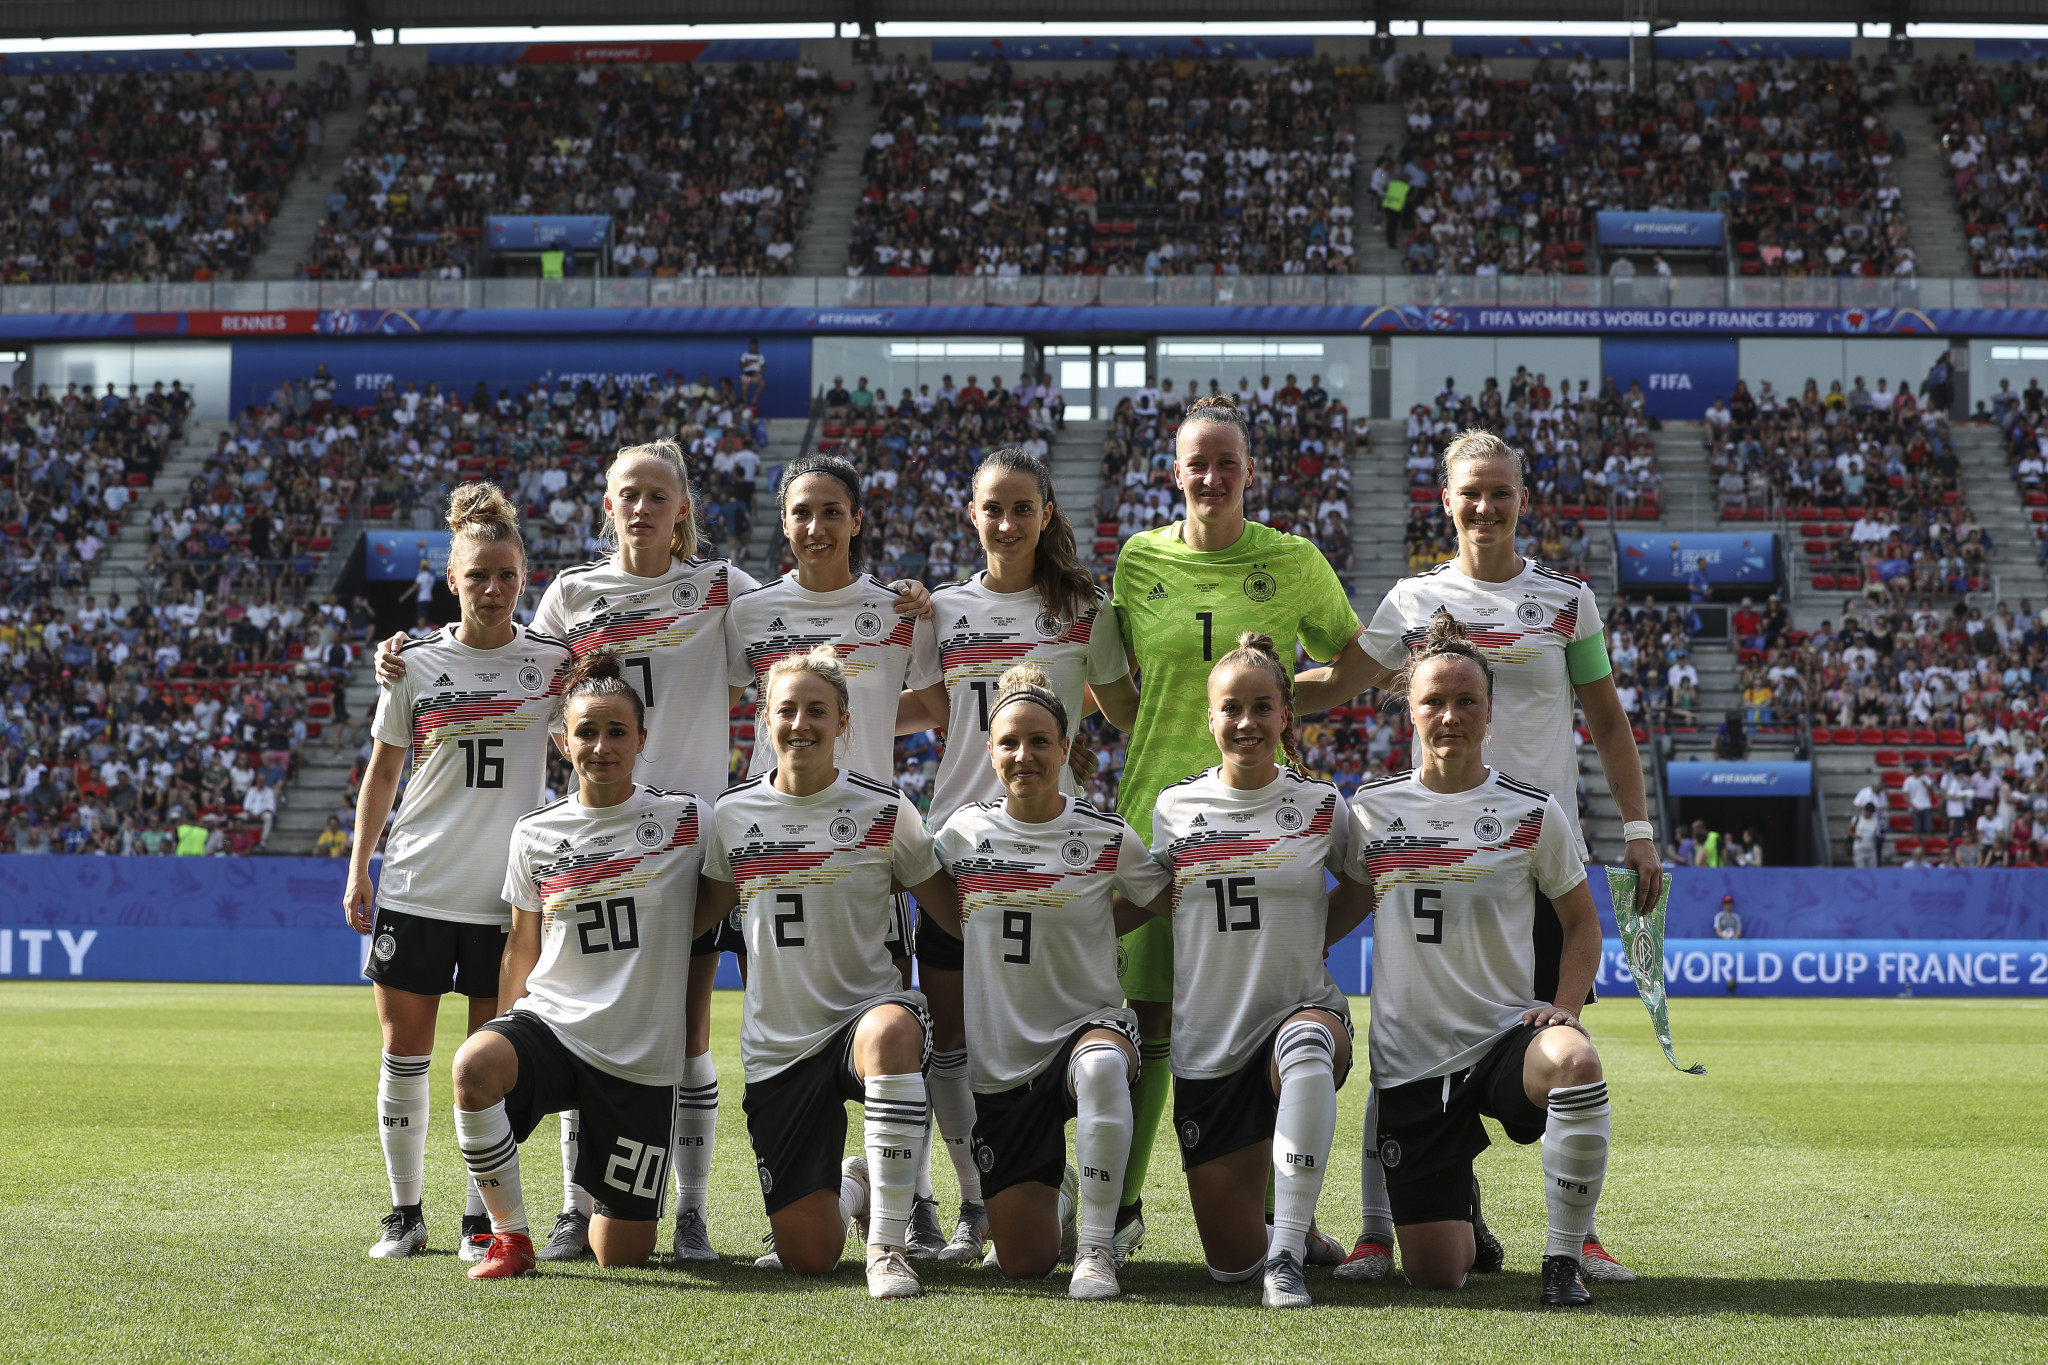 Germany has announced plans to jointly bid to host the 2027 Women's Football World Cup ©Getty Images